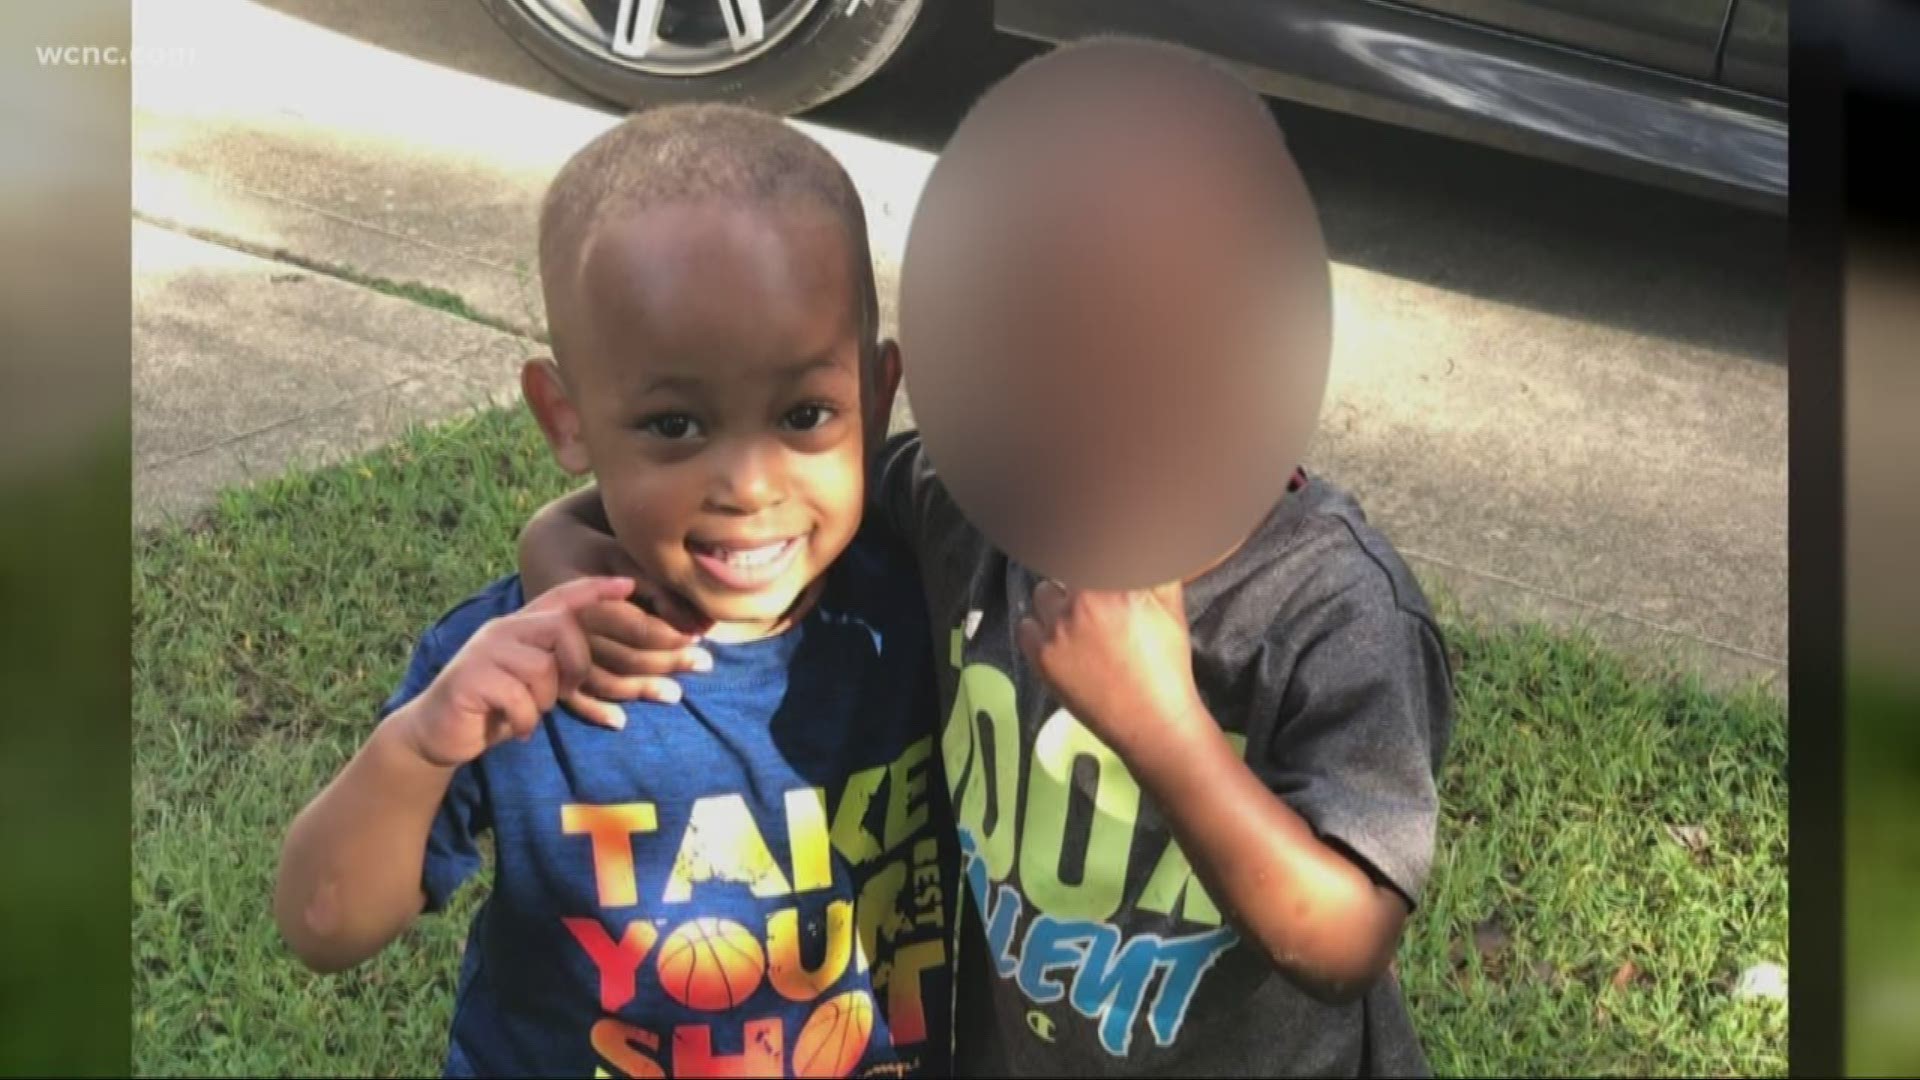 According to officials, 3-year-old Jaiden Cowart died following an 'accident' at the Charlotte Airport.